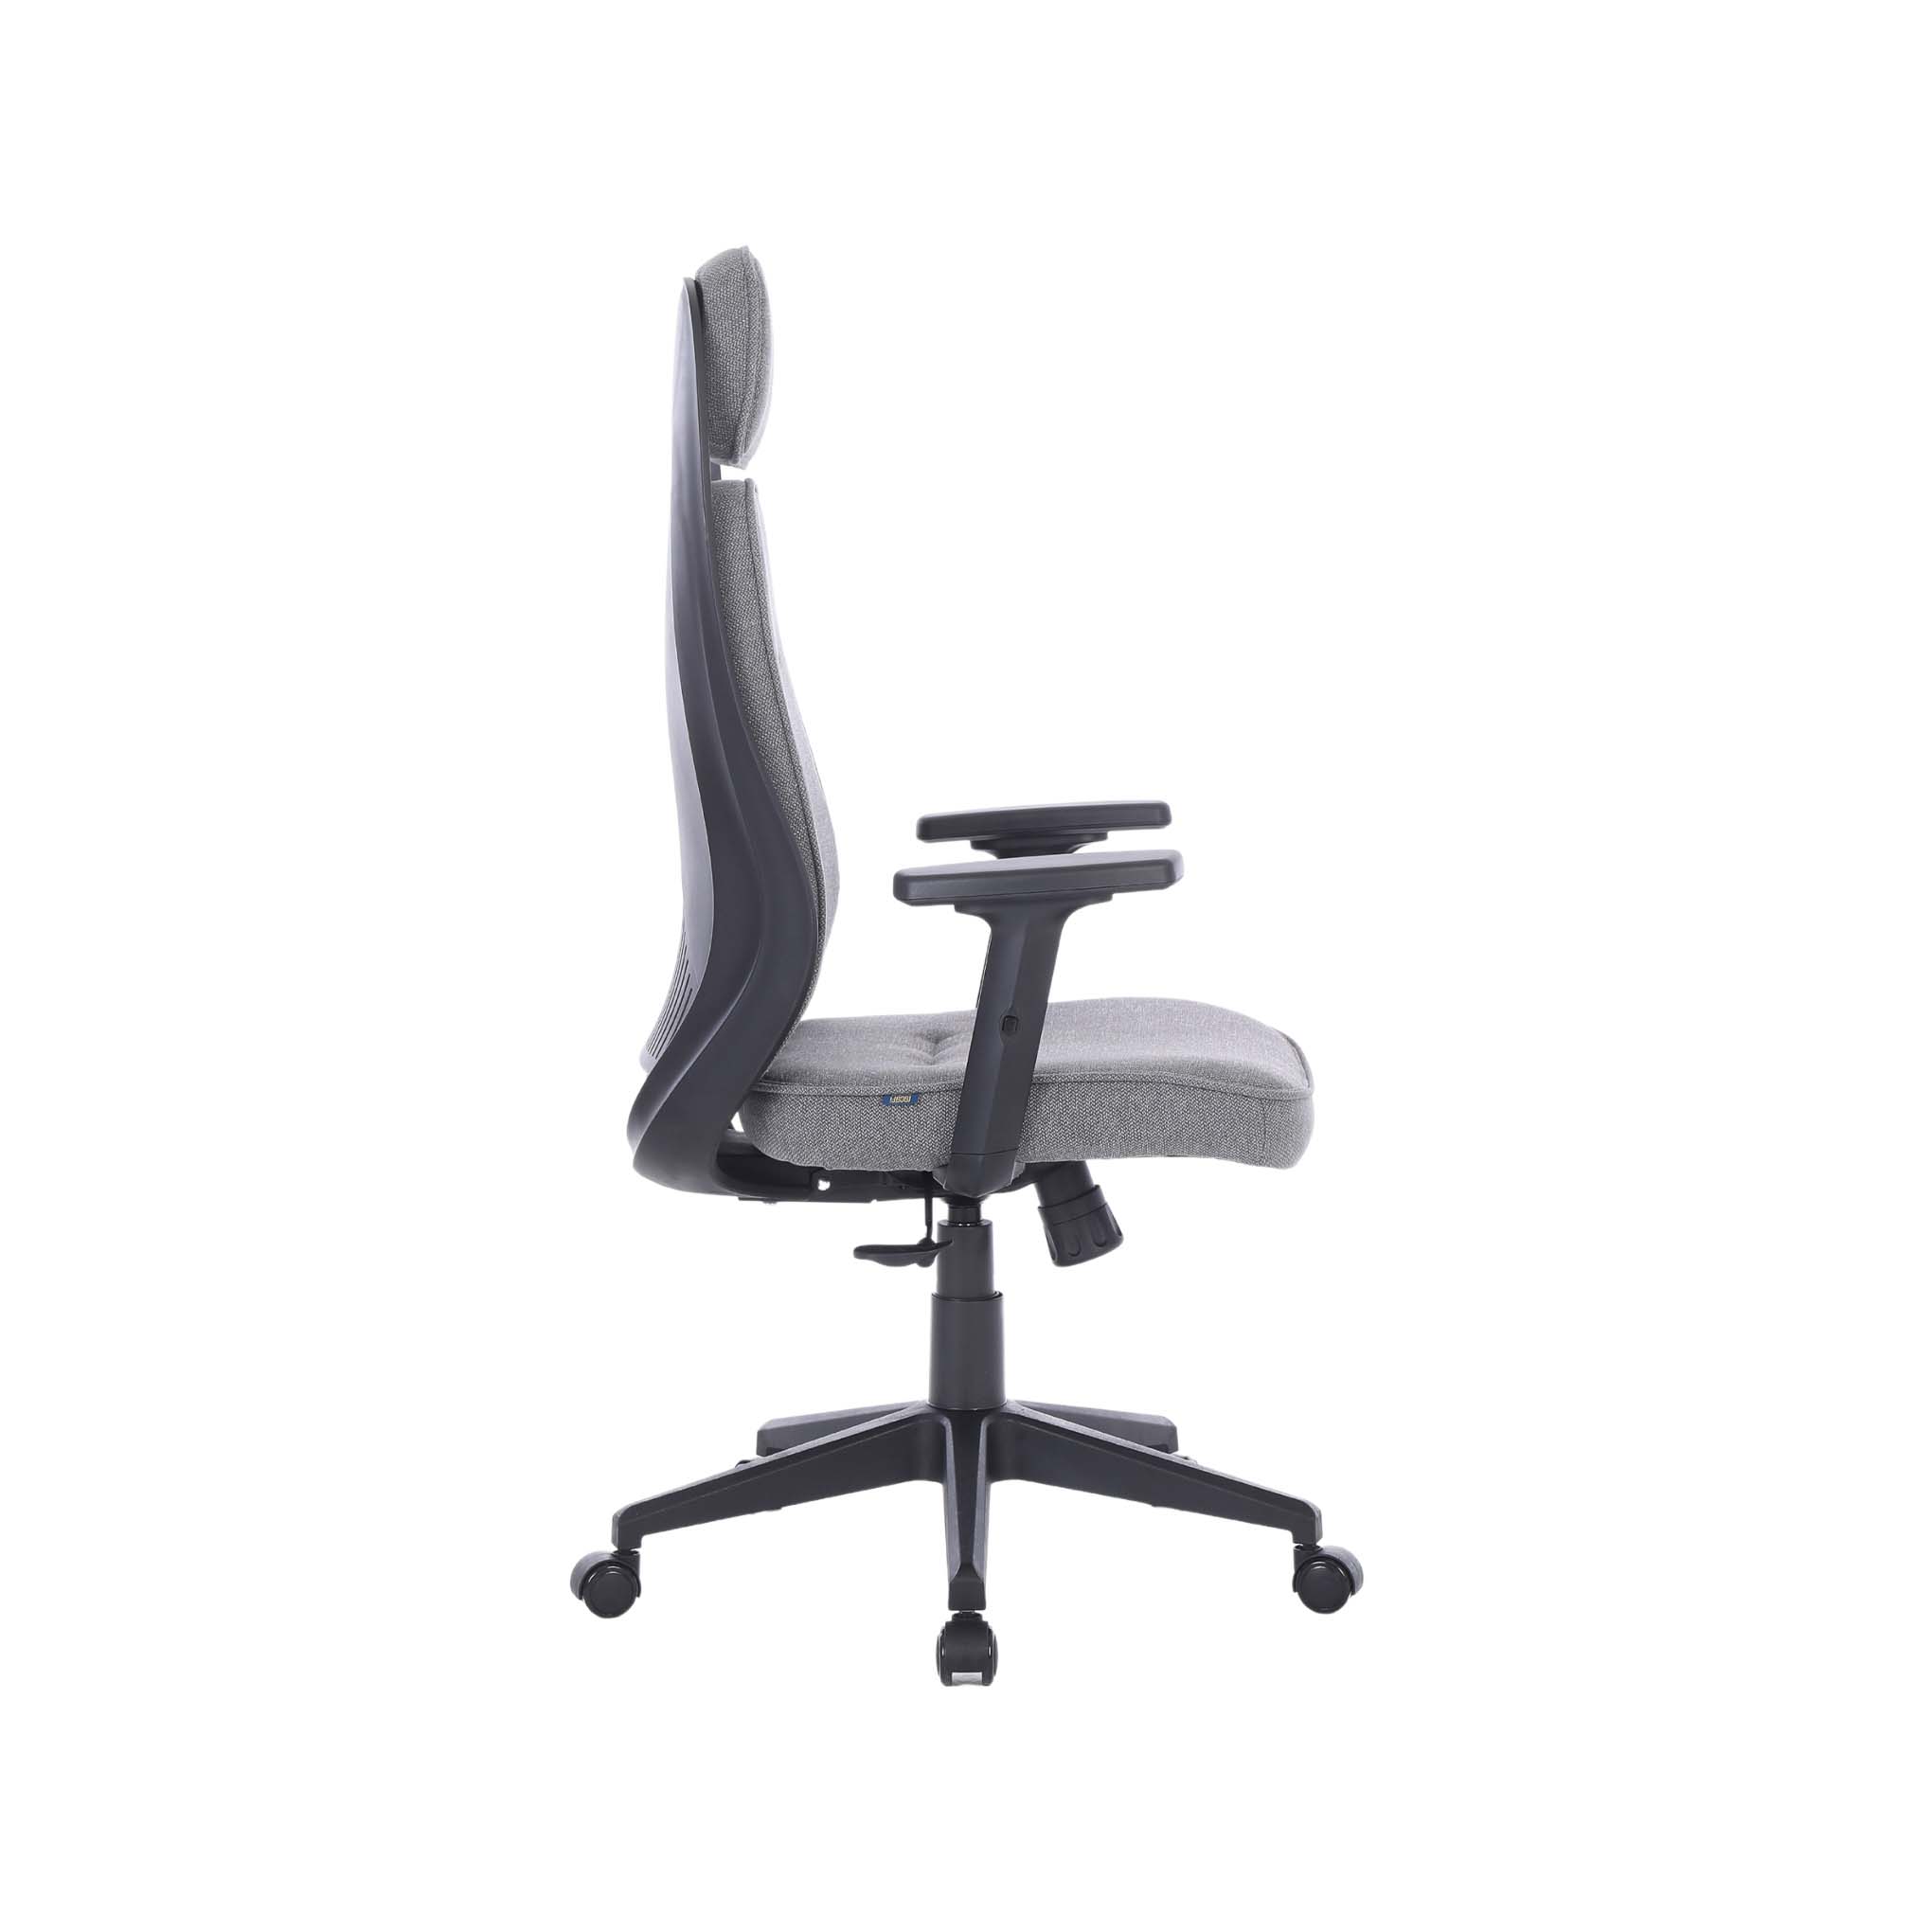 Tiver High Back Office Chair